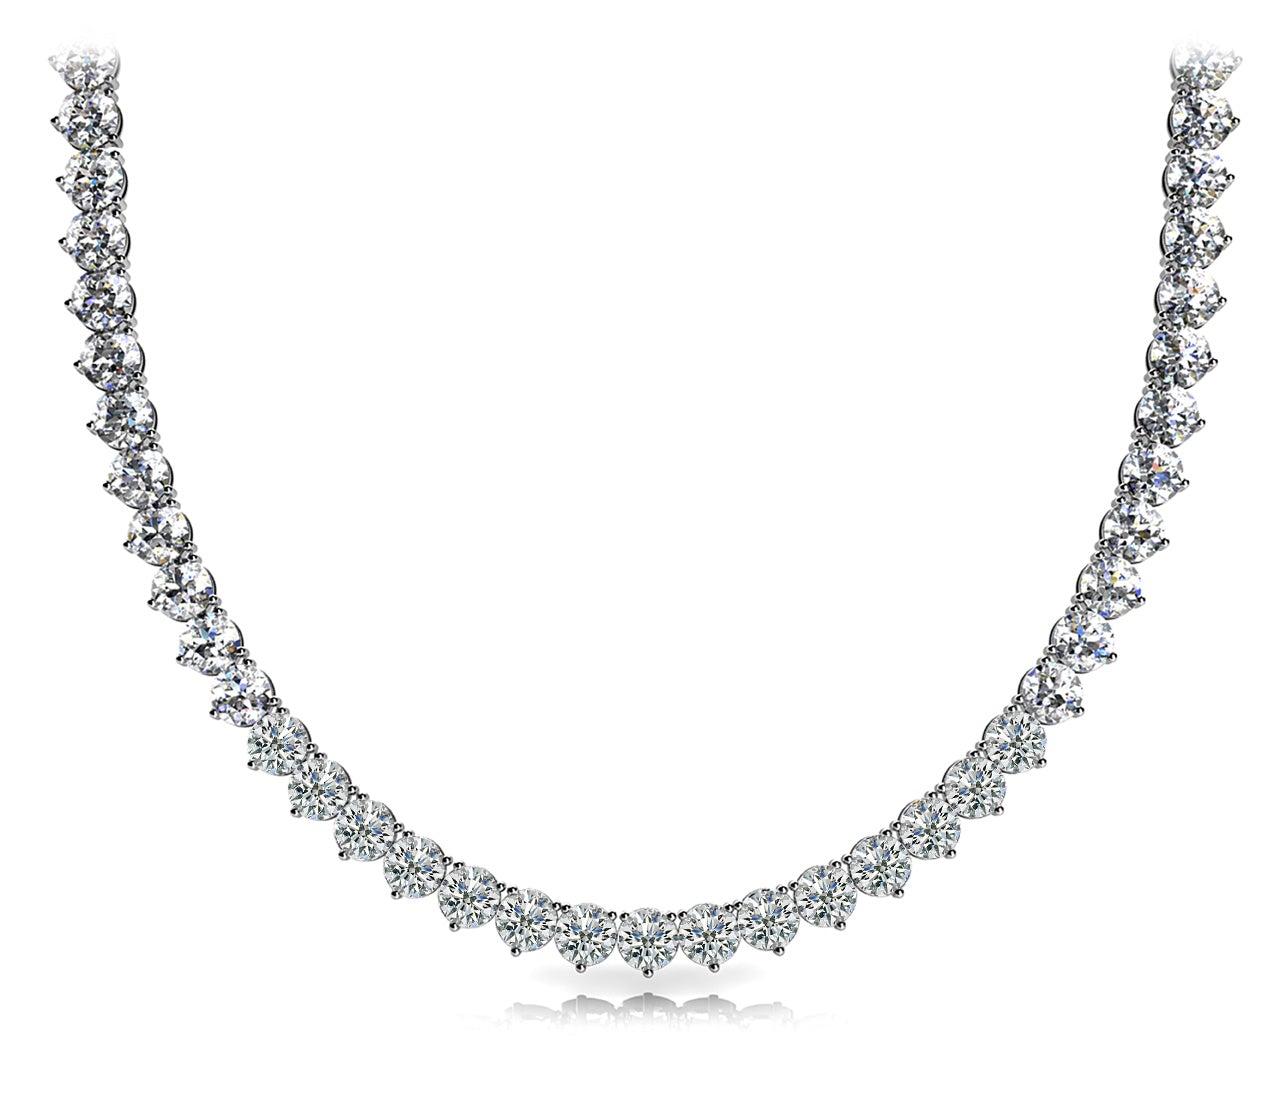 Diamond Rivera Necklace Round Shaped 10 Carat Necklace in 14K to 18K White Gold Front View